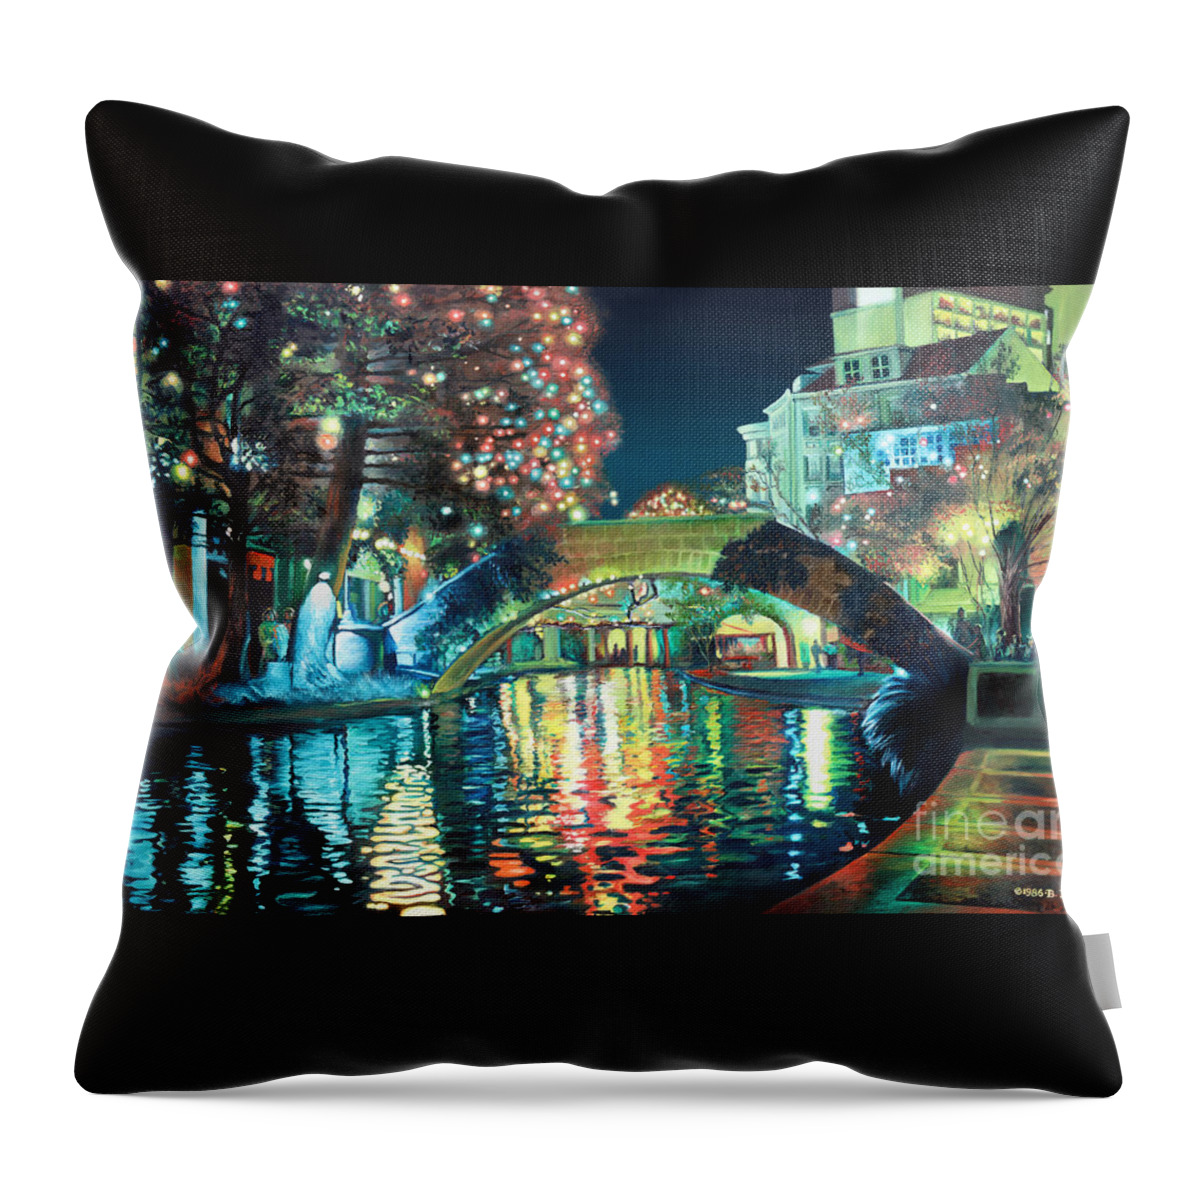 Landscape Throw Pillow featuring the painting Riverwalk by Baron Dixon